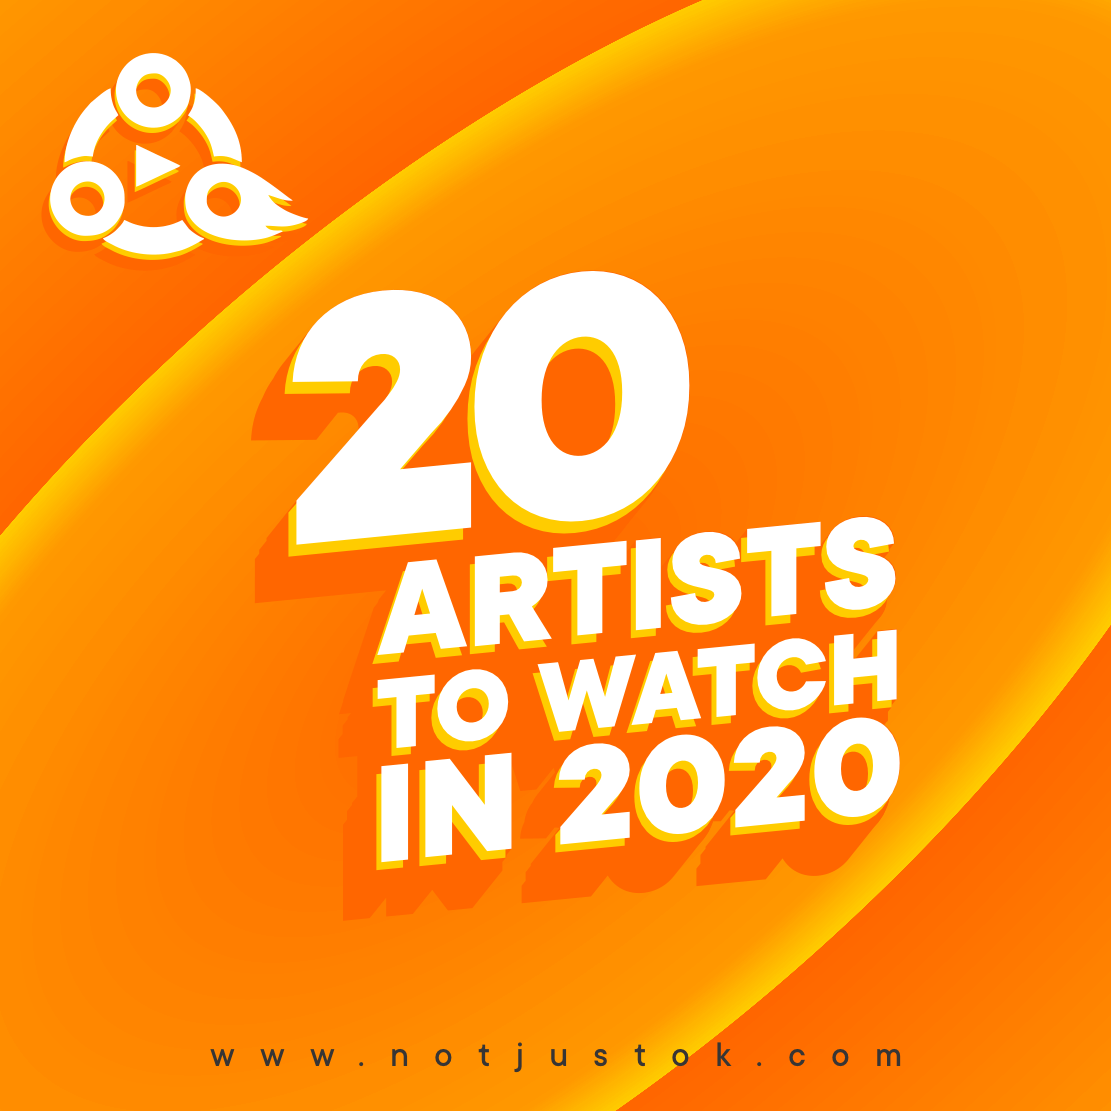 20 Artistes To Watch In 2020